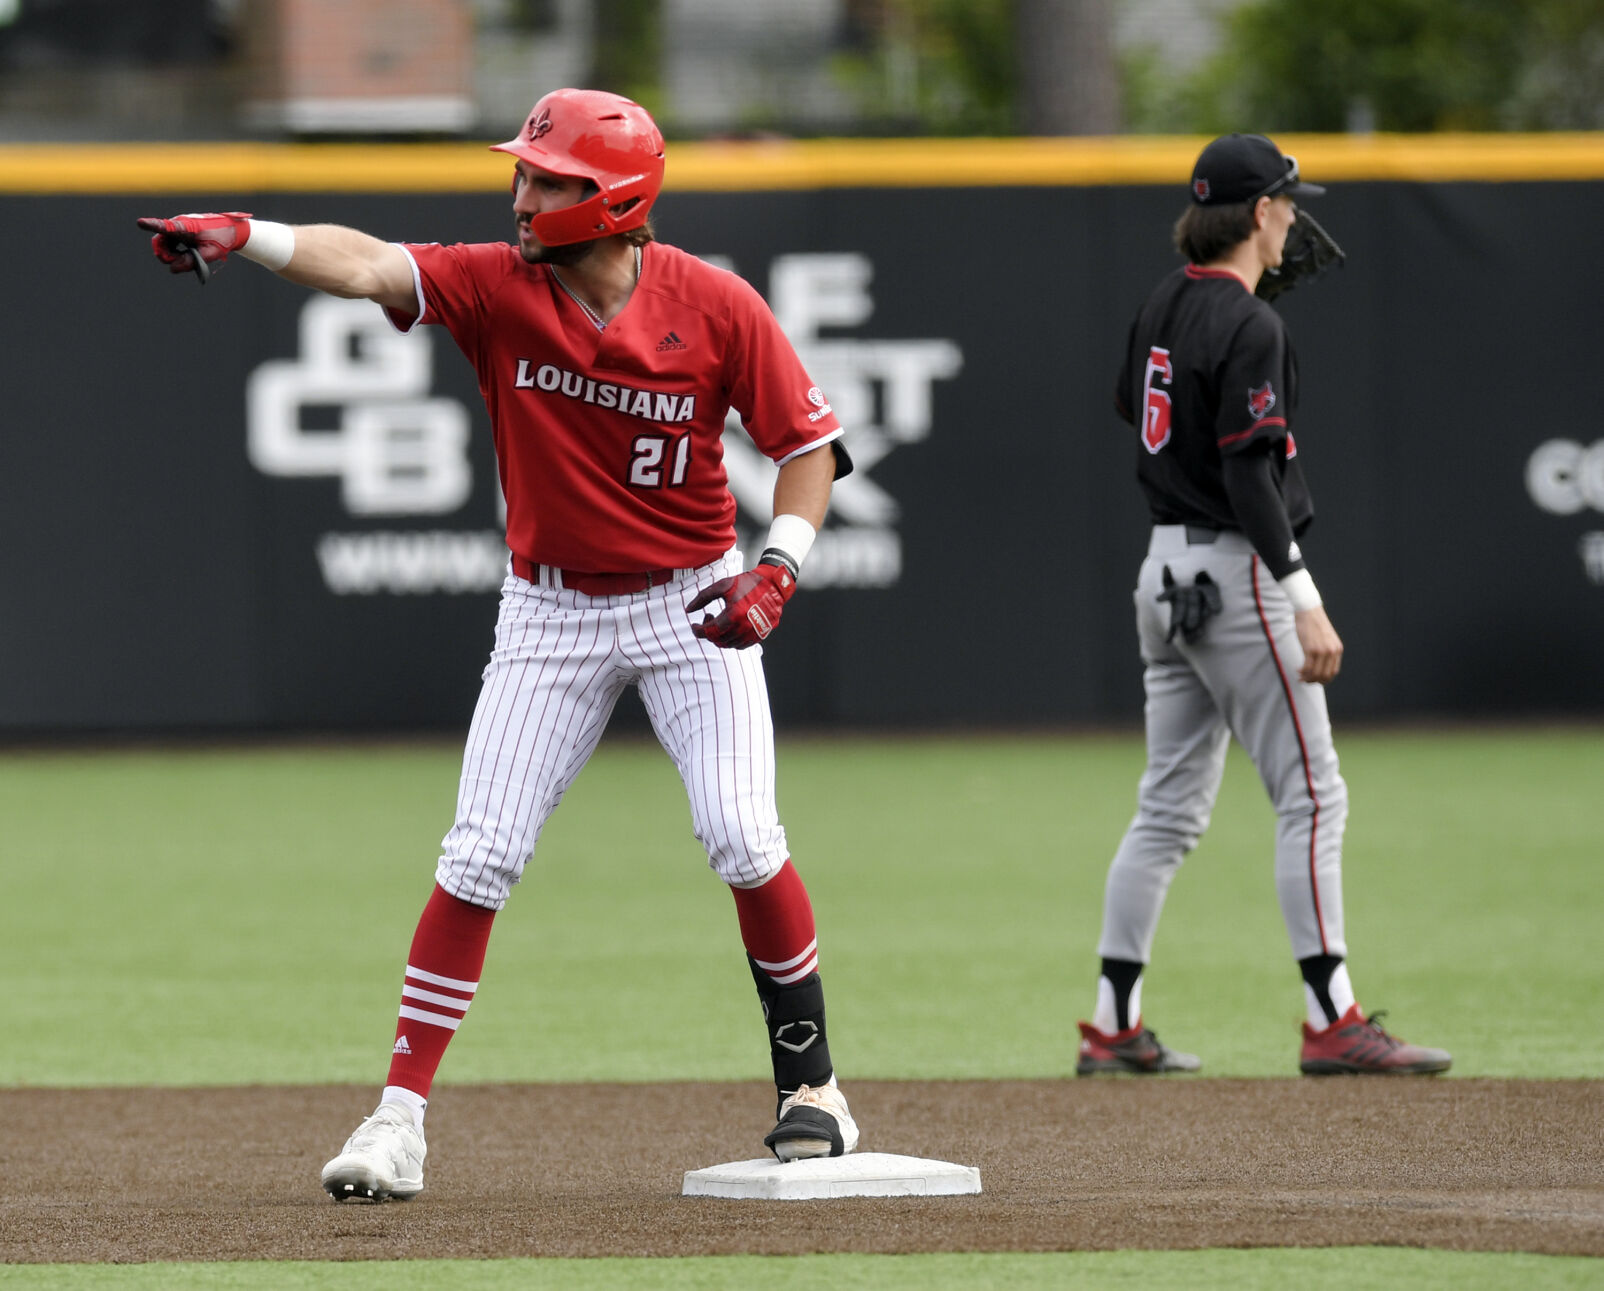 Foote UL baseball team looks talented and focused but brutal schedule  early awaits  UL Ragin Cajuns  theadvocatecom